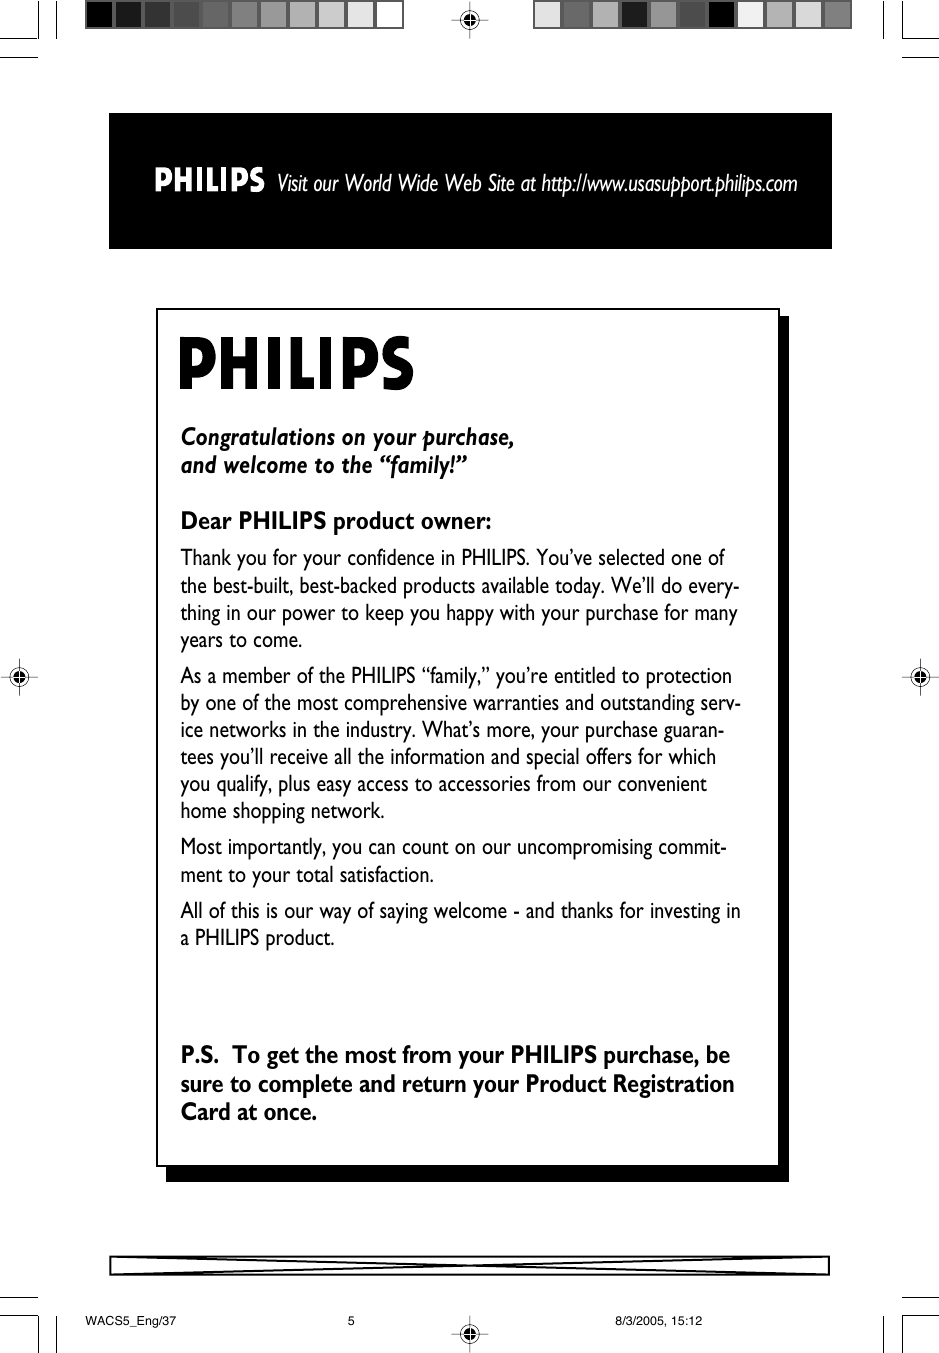 Visit our World Wide Web Site at http://www.usasupport.philips.comCongratulations on your purchase, and welcome to the “family!”Dear PHILIPS product owner:Thank you for your confidence in PHILIPS. You’ve selected one ofthe best-built, best-backed products available today. We’ll do every-thing in our power to keep you happy with your purchase for manyyears to come. As a member of the PHILIPS “family,” you’re entitled to protectionby one of the most comprehensive warranties and outstanding serv-ice networks in the industry. What’s more, your purchase guaran-tees you’ll receive all the information and special offers for whichyou qualify, plus easy access to accessories from our convenienthome shopping network.Most importantly, you can count on our uncompromising commit-ment to your total satisfaction.All of this is our way of saying welcome - and thanks for investing ina PHILIPS product.P.S.  To get the most from your PHILIPS purchase, besure to complete and return your Product RegistrationCard at once.WACS5_Eng/37 8/3/2005, 15:125